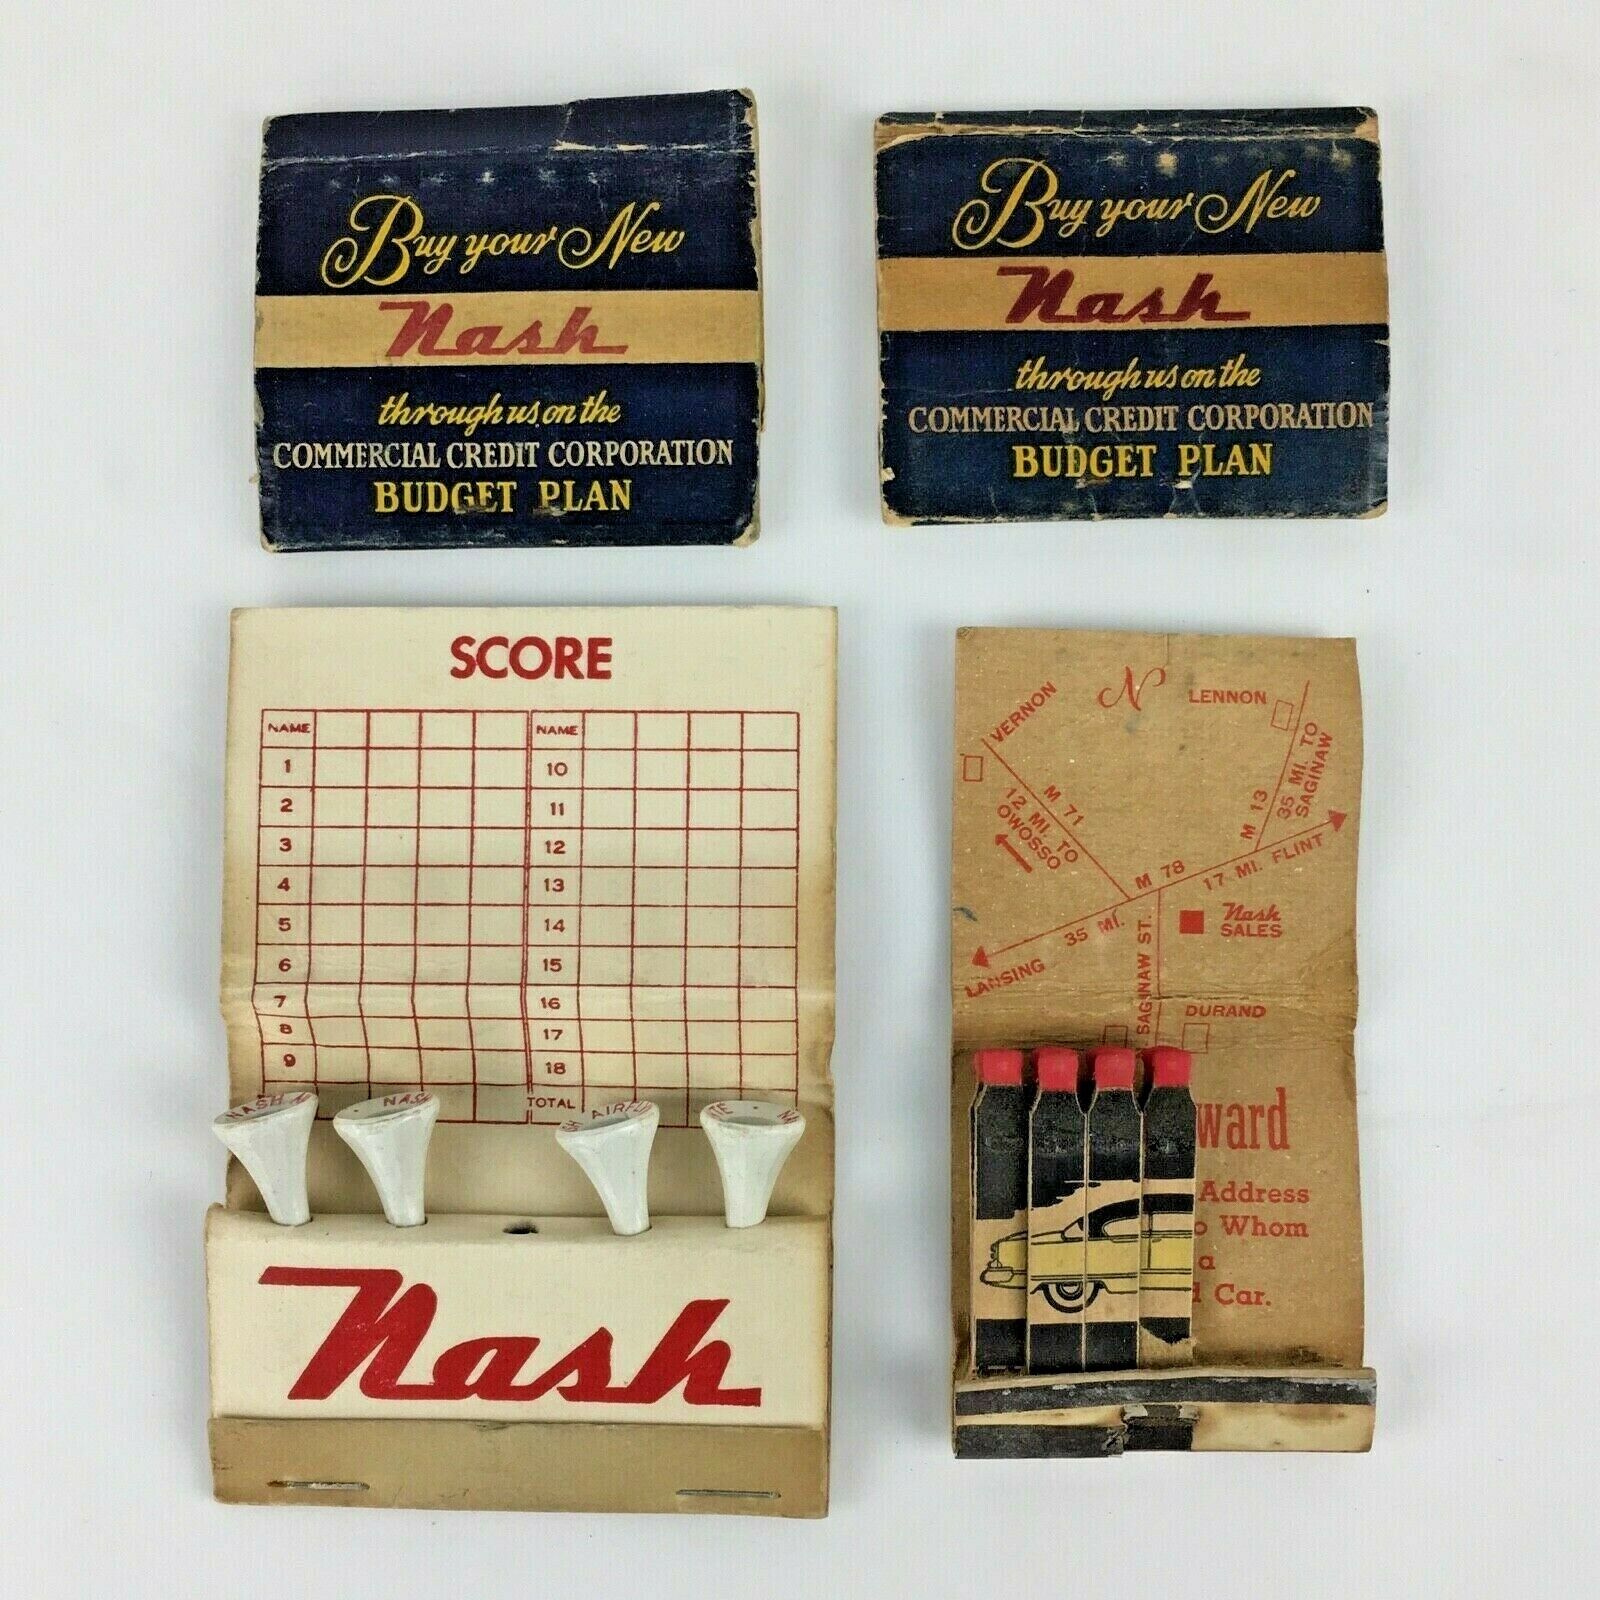 NASH Car Matchbook Covers Golf Tees Lot 4 Printed Stems Advertising Vintage Auto